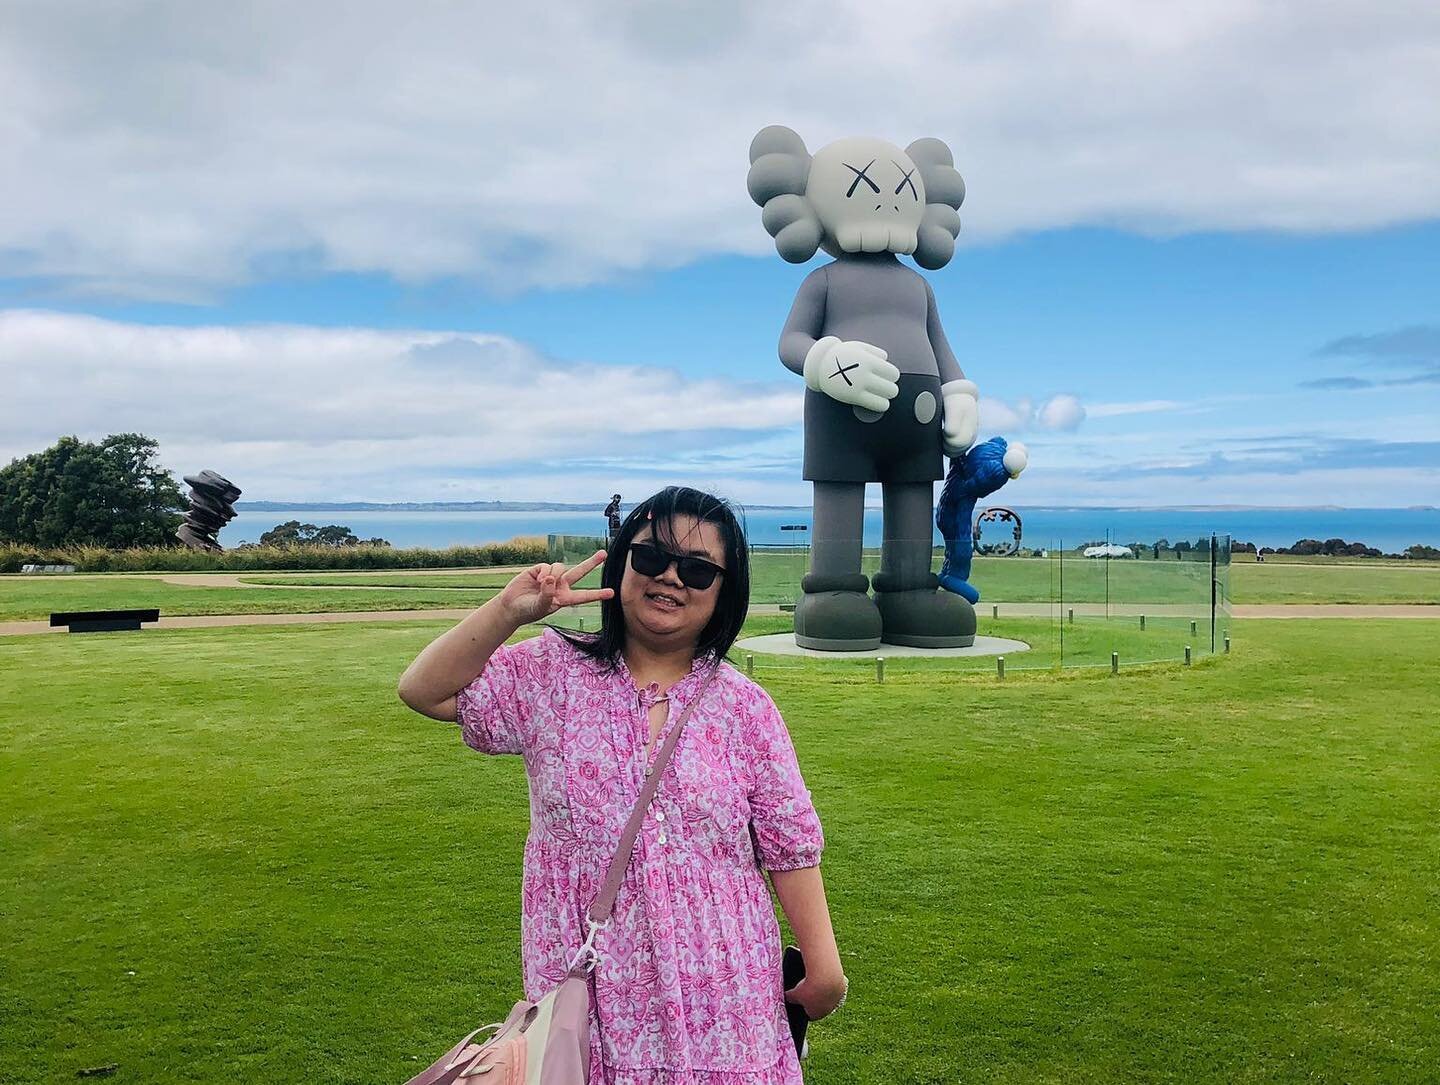 On the weekend we checked out the sculptures at Point Leo Estate, an impressive collection of art that was enjoyed by all! 🗿🗽☀️

🏷️ 
#smallbusinessmelbourne #smallbusinessvictoria #ndis #ndissupport #ndisaustralia #ndissupportcoordination #support